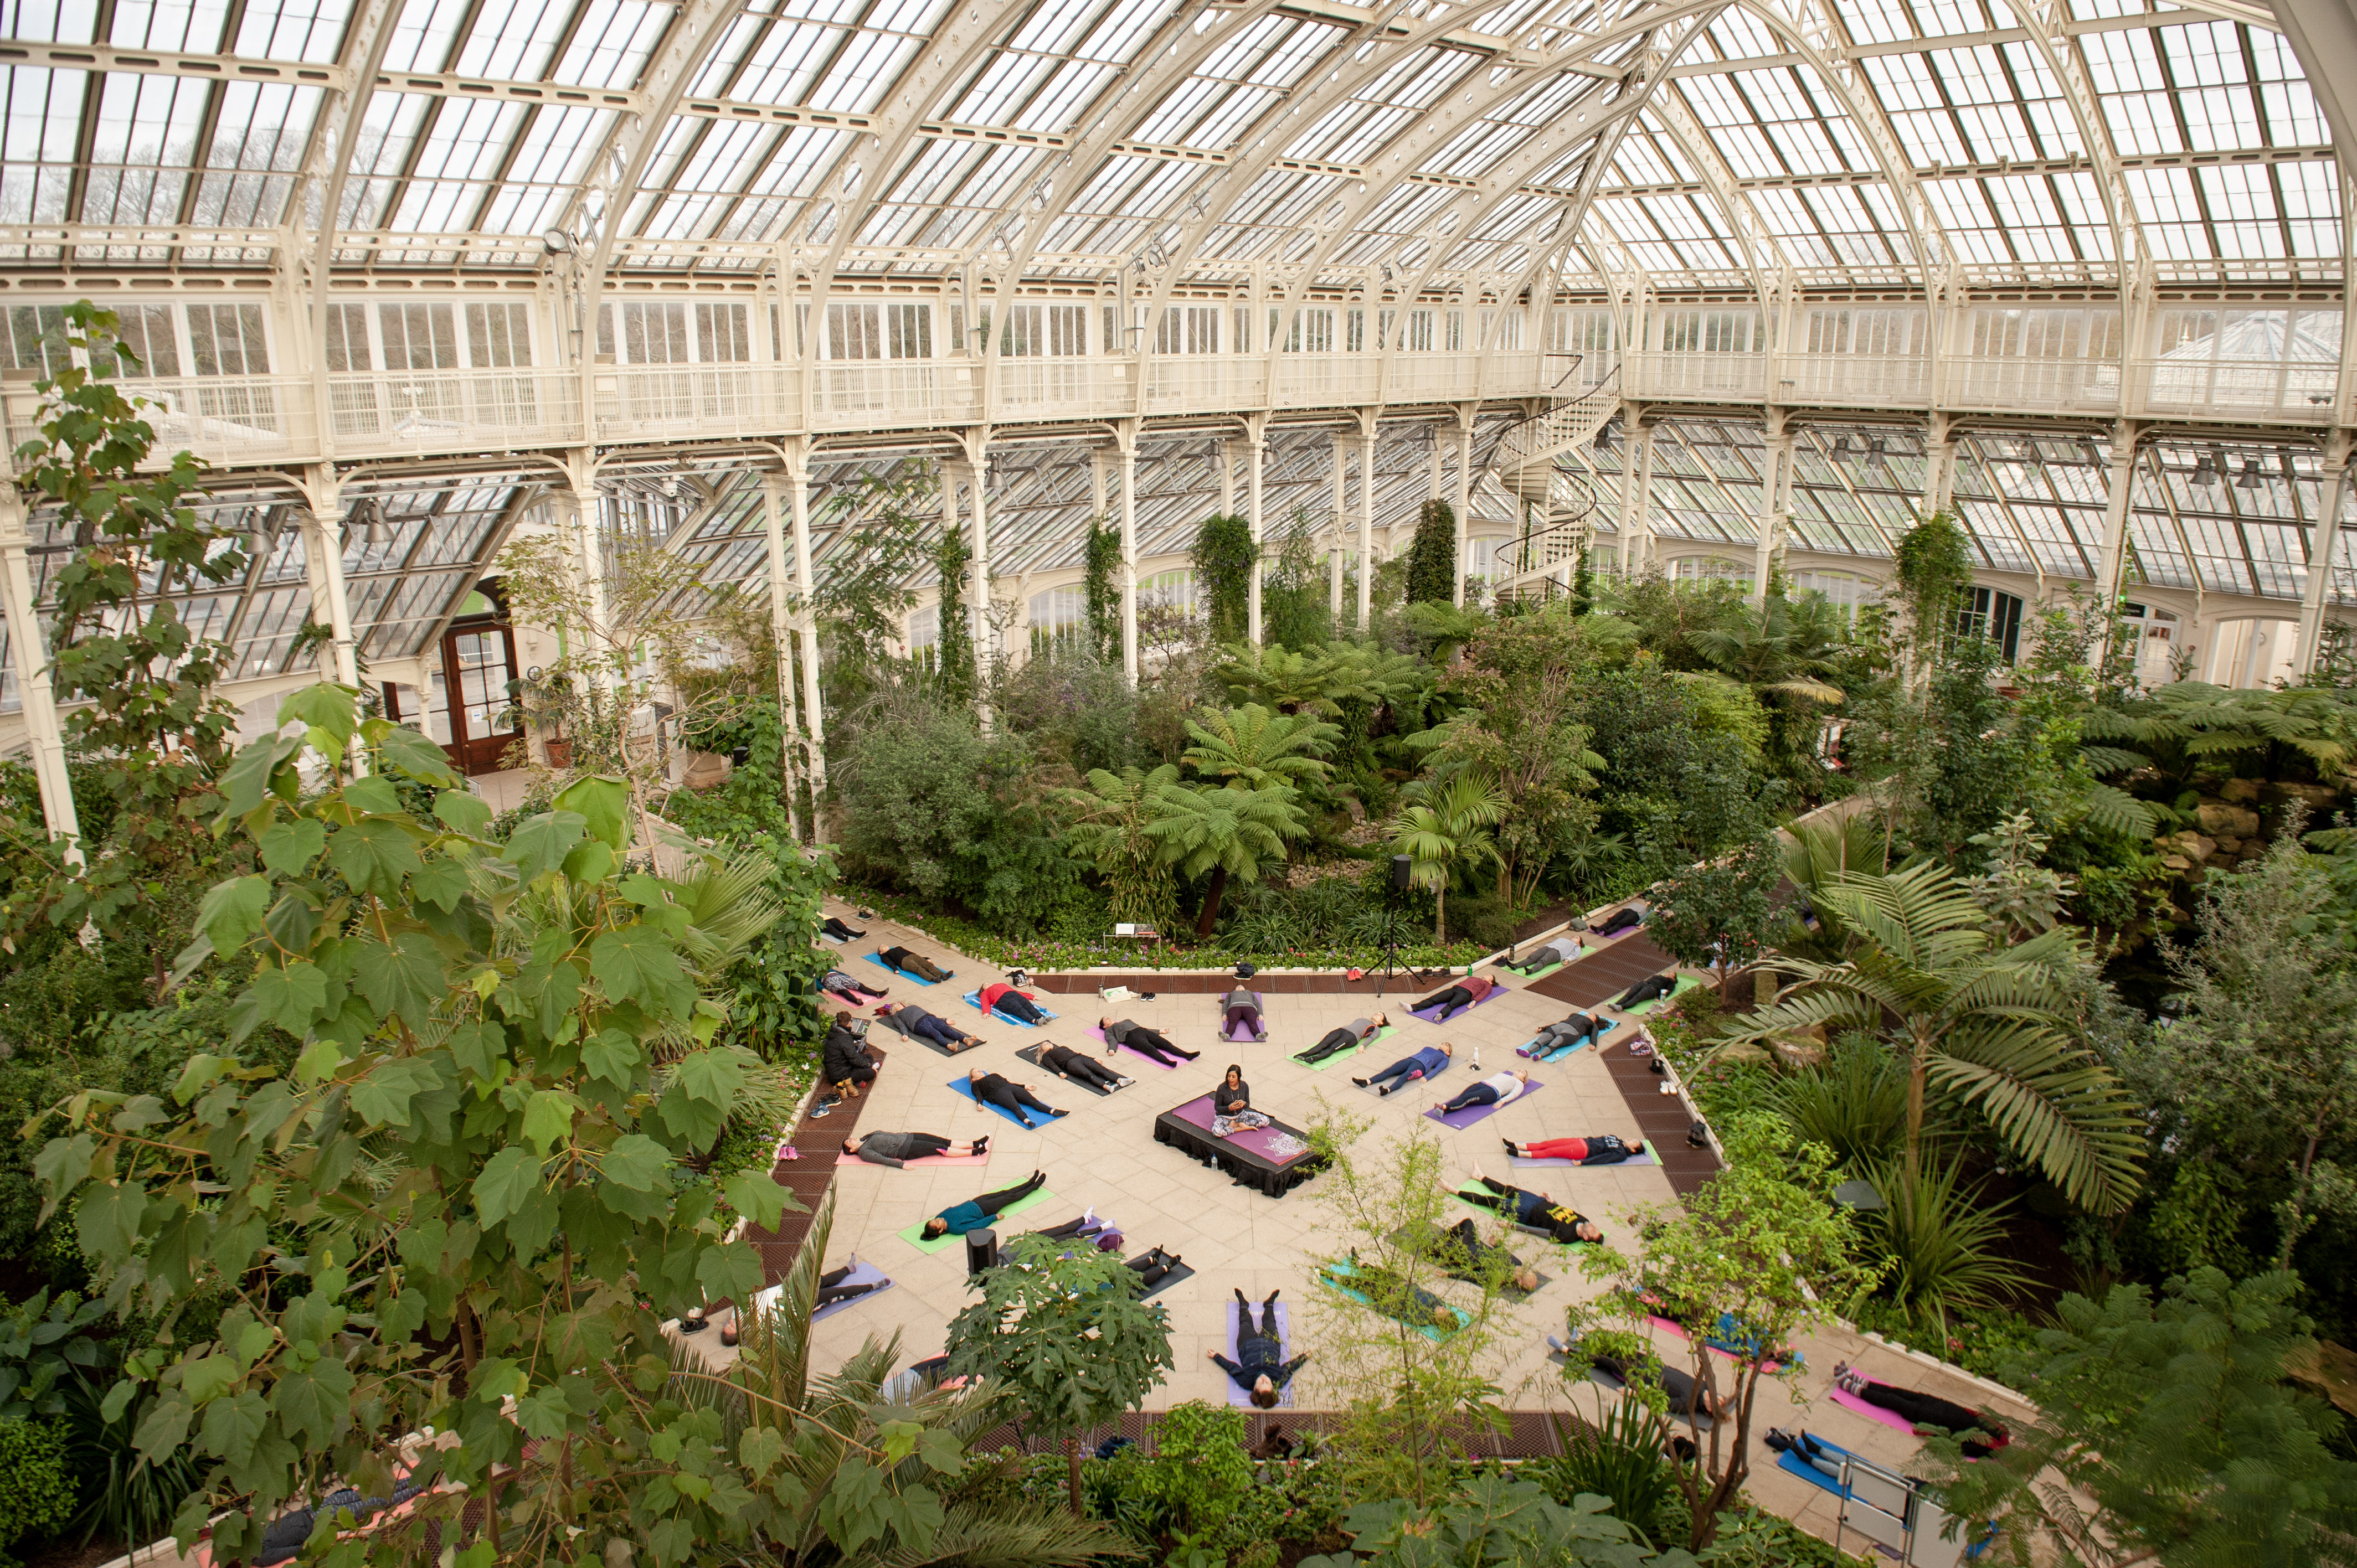 Many people lie on yoga mats surrounded by green plants in a glasshouse